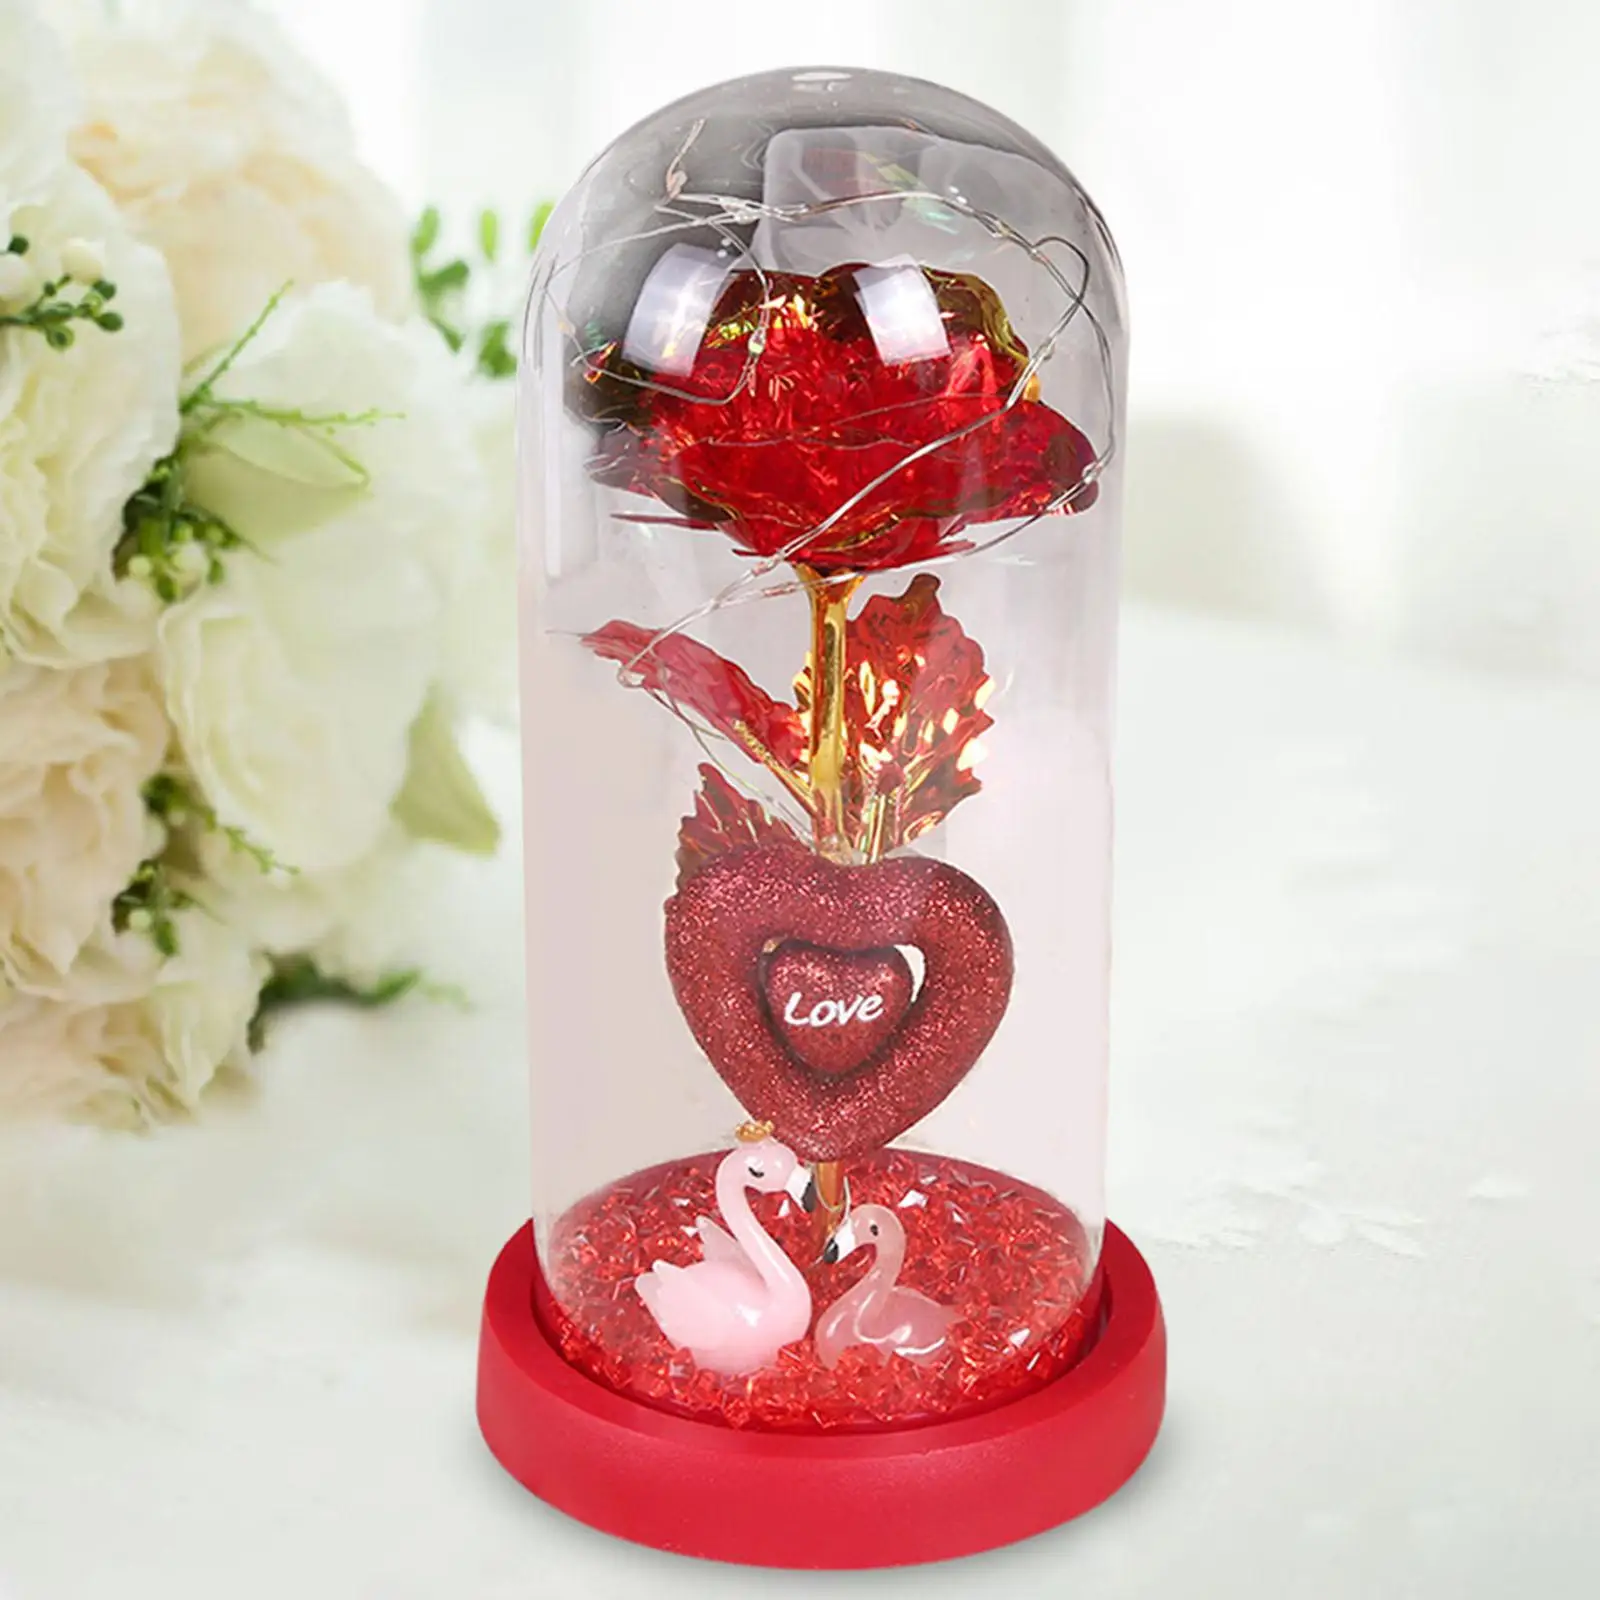 Glass Rose Flower Gift Valentines Day Decor Valentines Day Gifts for Men Eternal Birthday Gift Crafts Rose Flower in Dome Glass